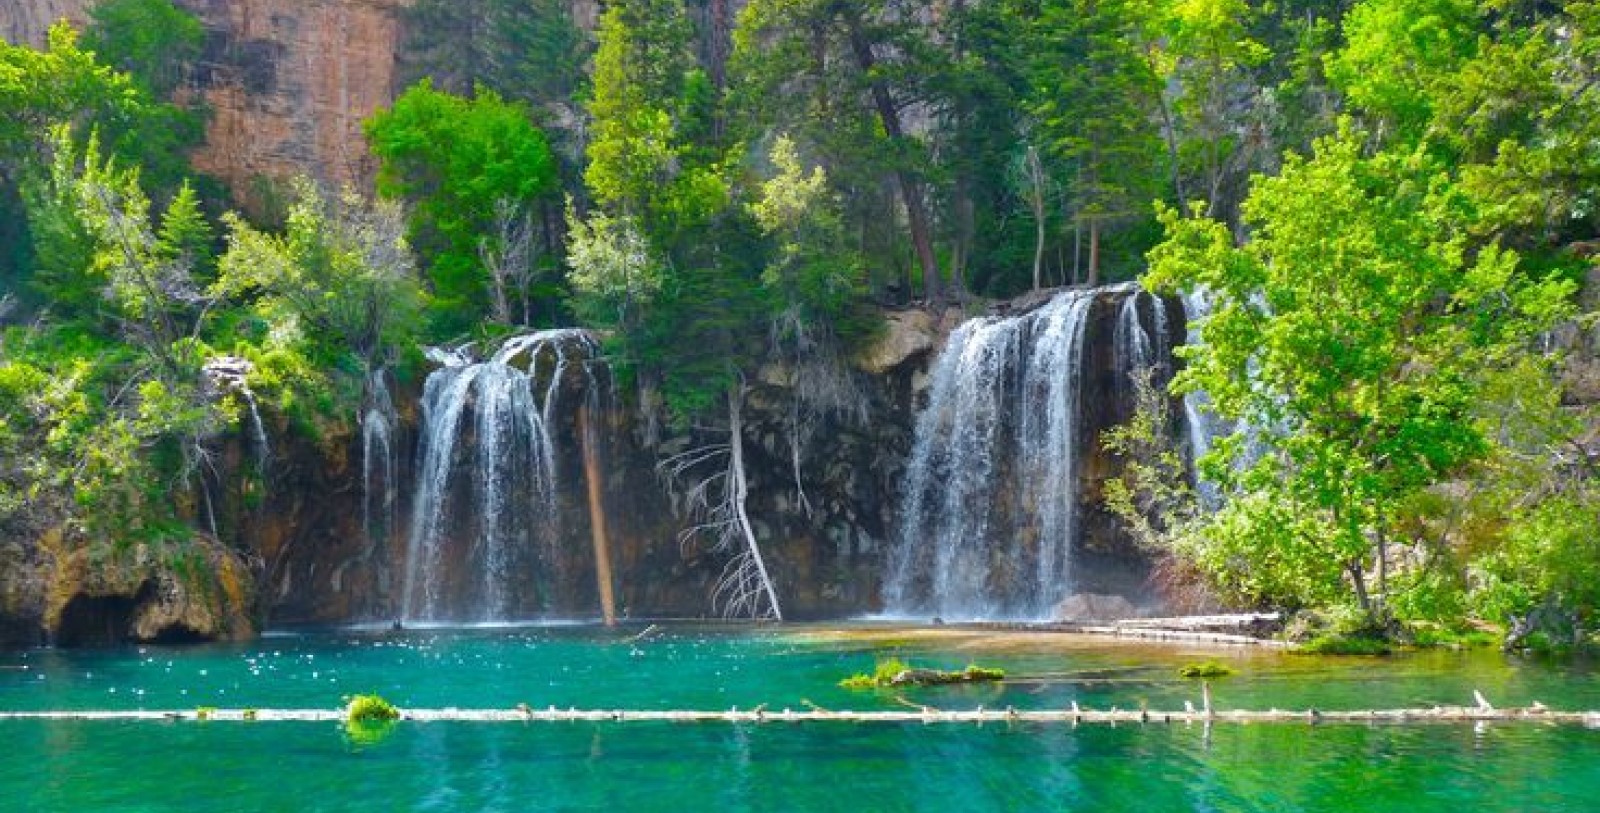 Explore the magnificence of Hanging Lake Park.